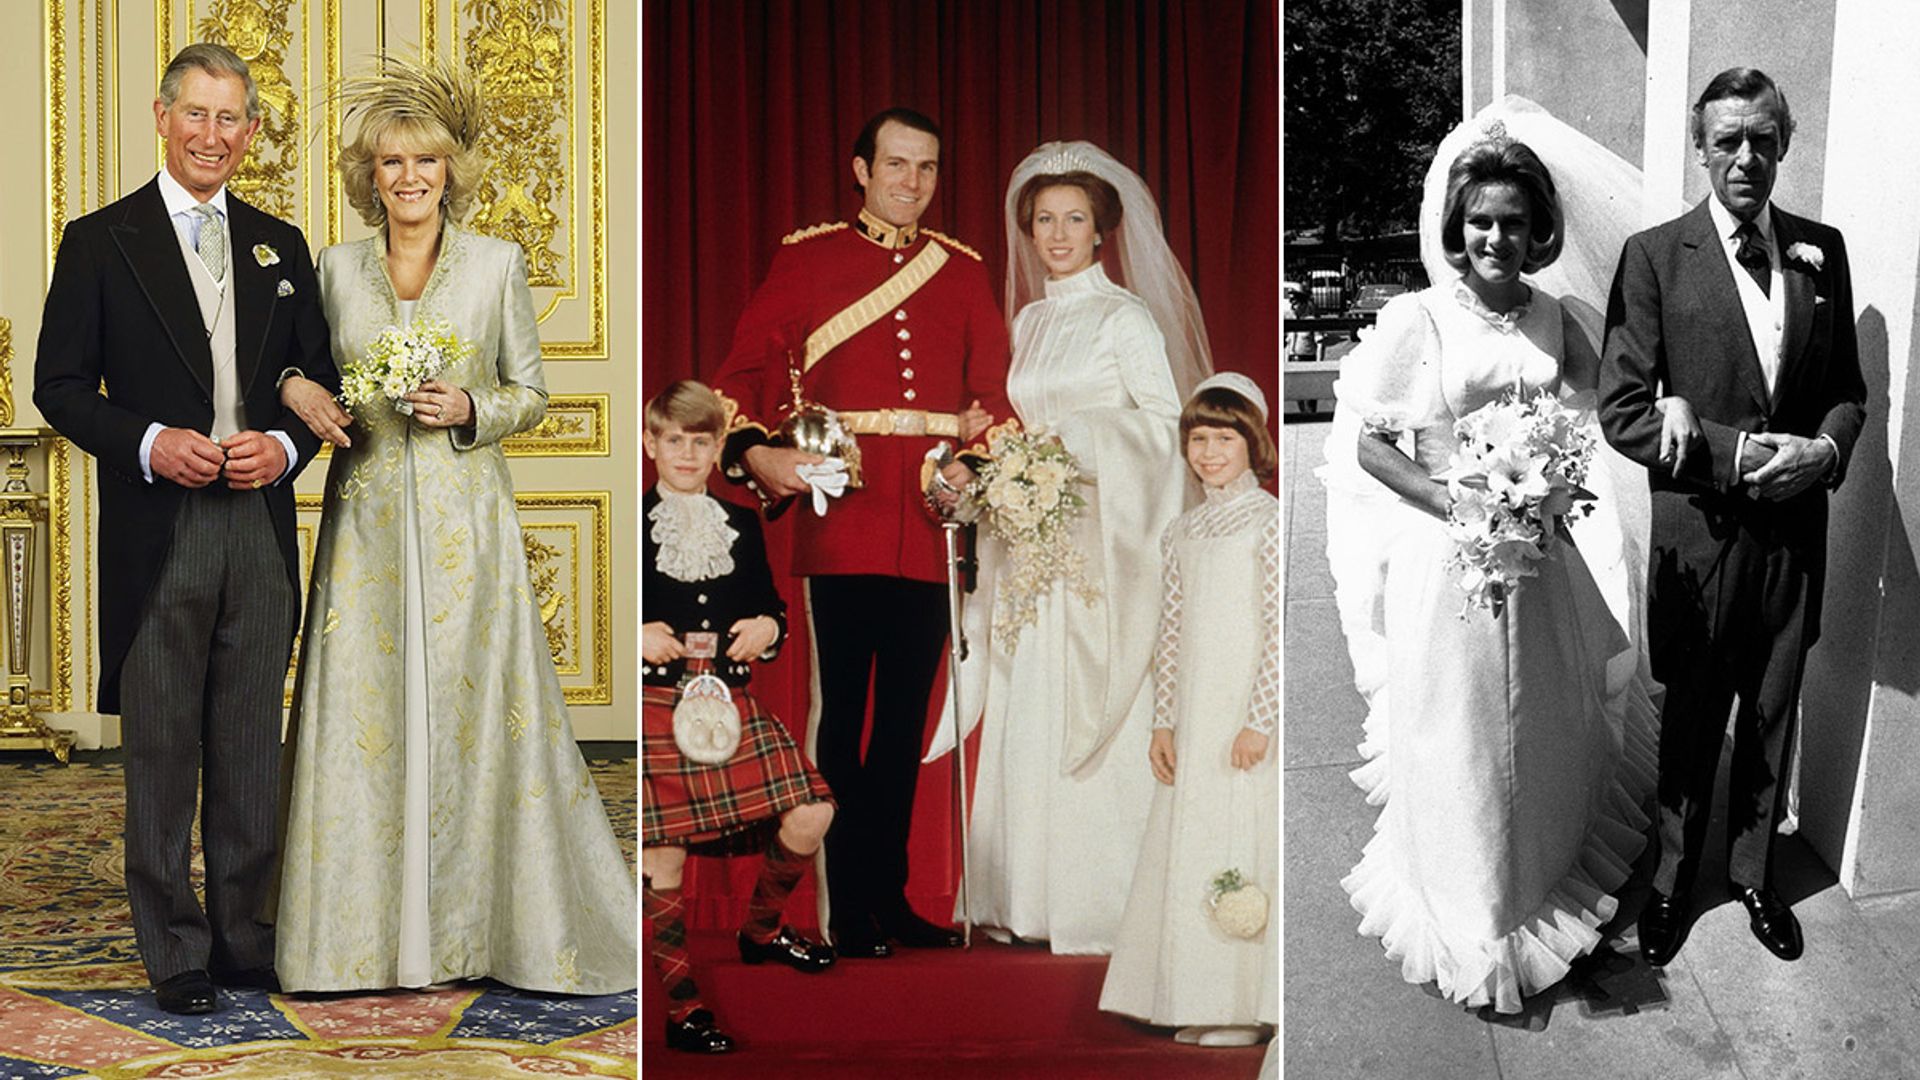 7 royals who remarried after divorce: From Prince Charles to Princess Anne